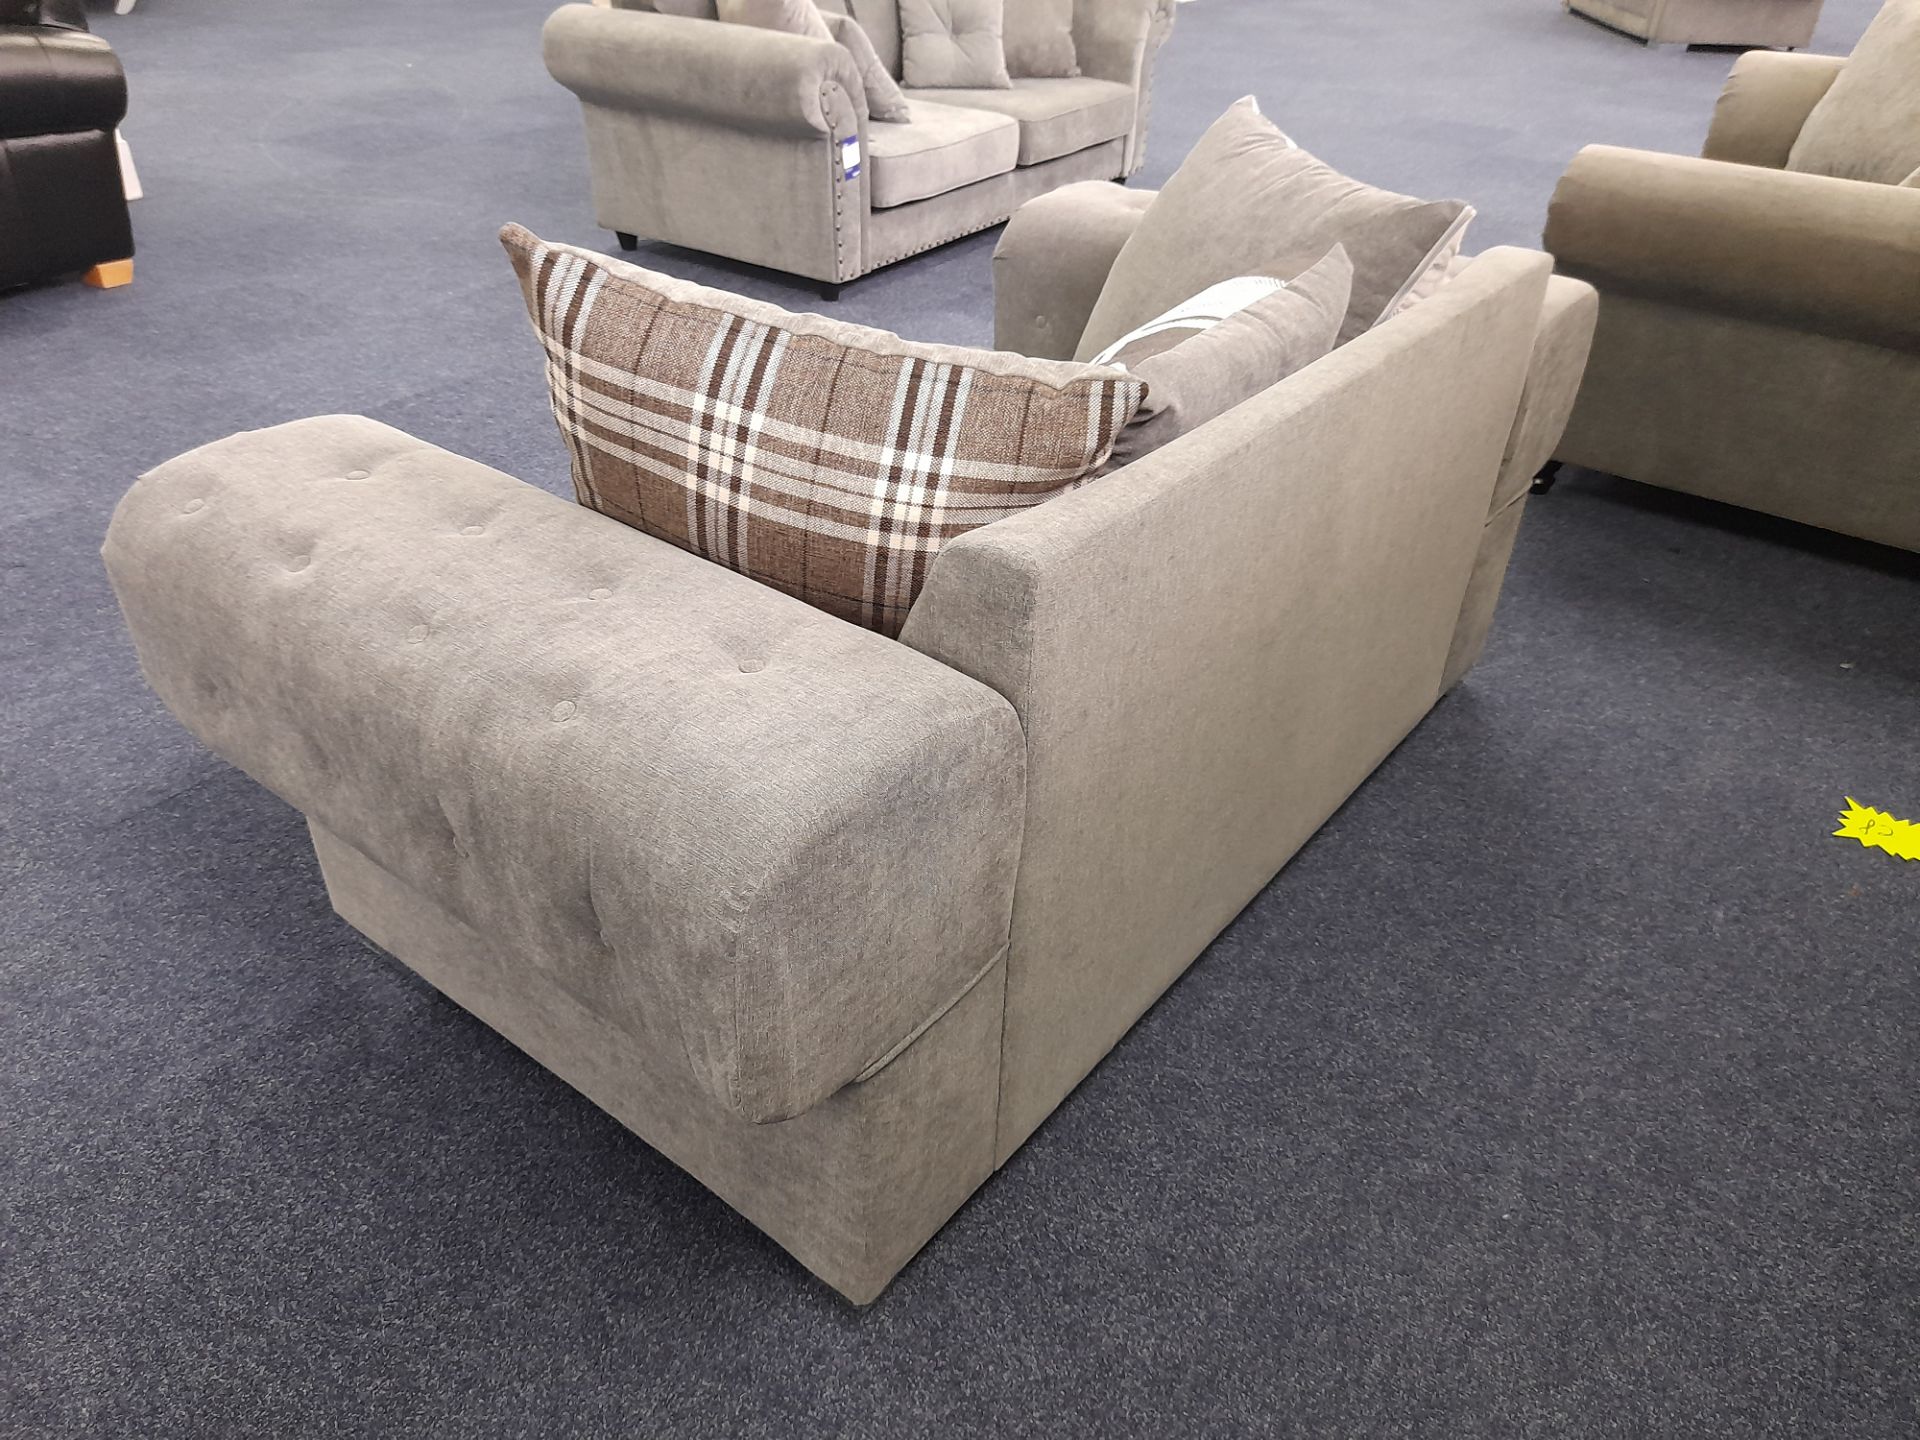 Grey fabric upholstered, 2 seater, scatter cushioned back sofa (Ex-Display) - Image 3 of 5